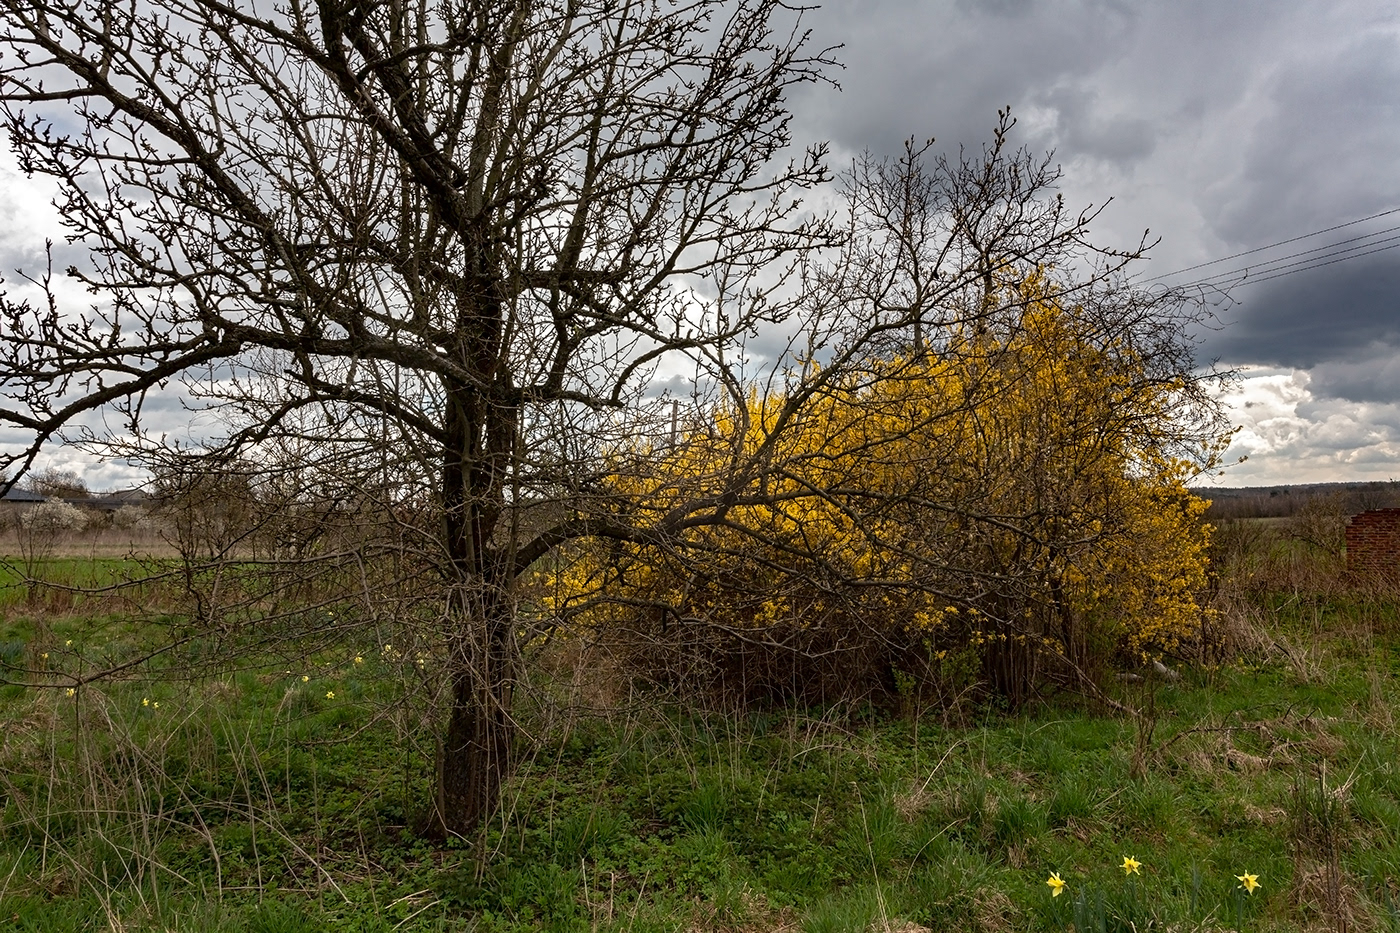 blossom bush Cloudy Sky grass meadow naked trees Narciso rural spring